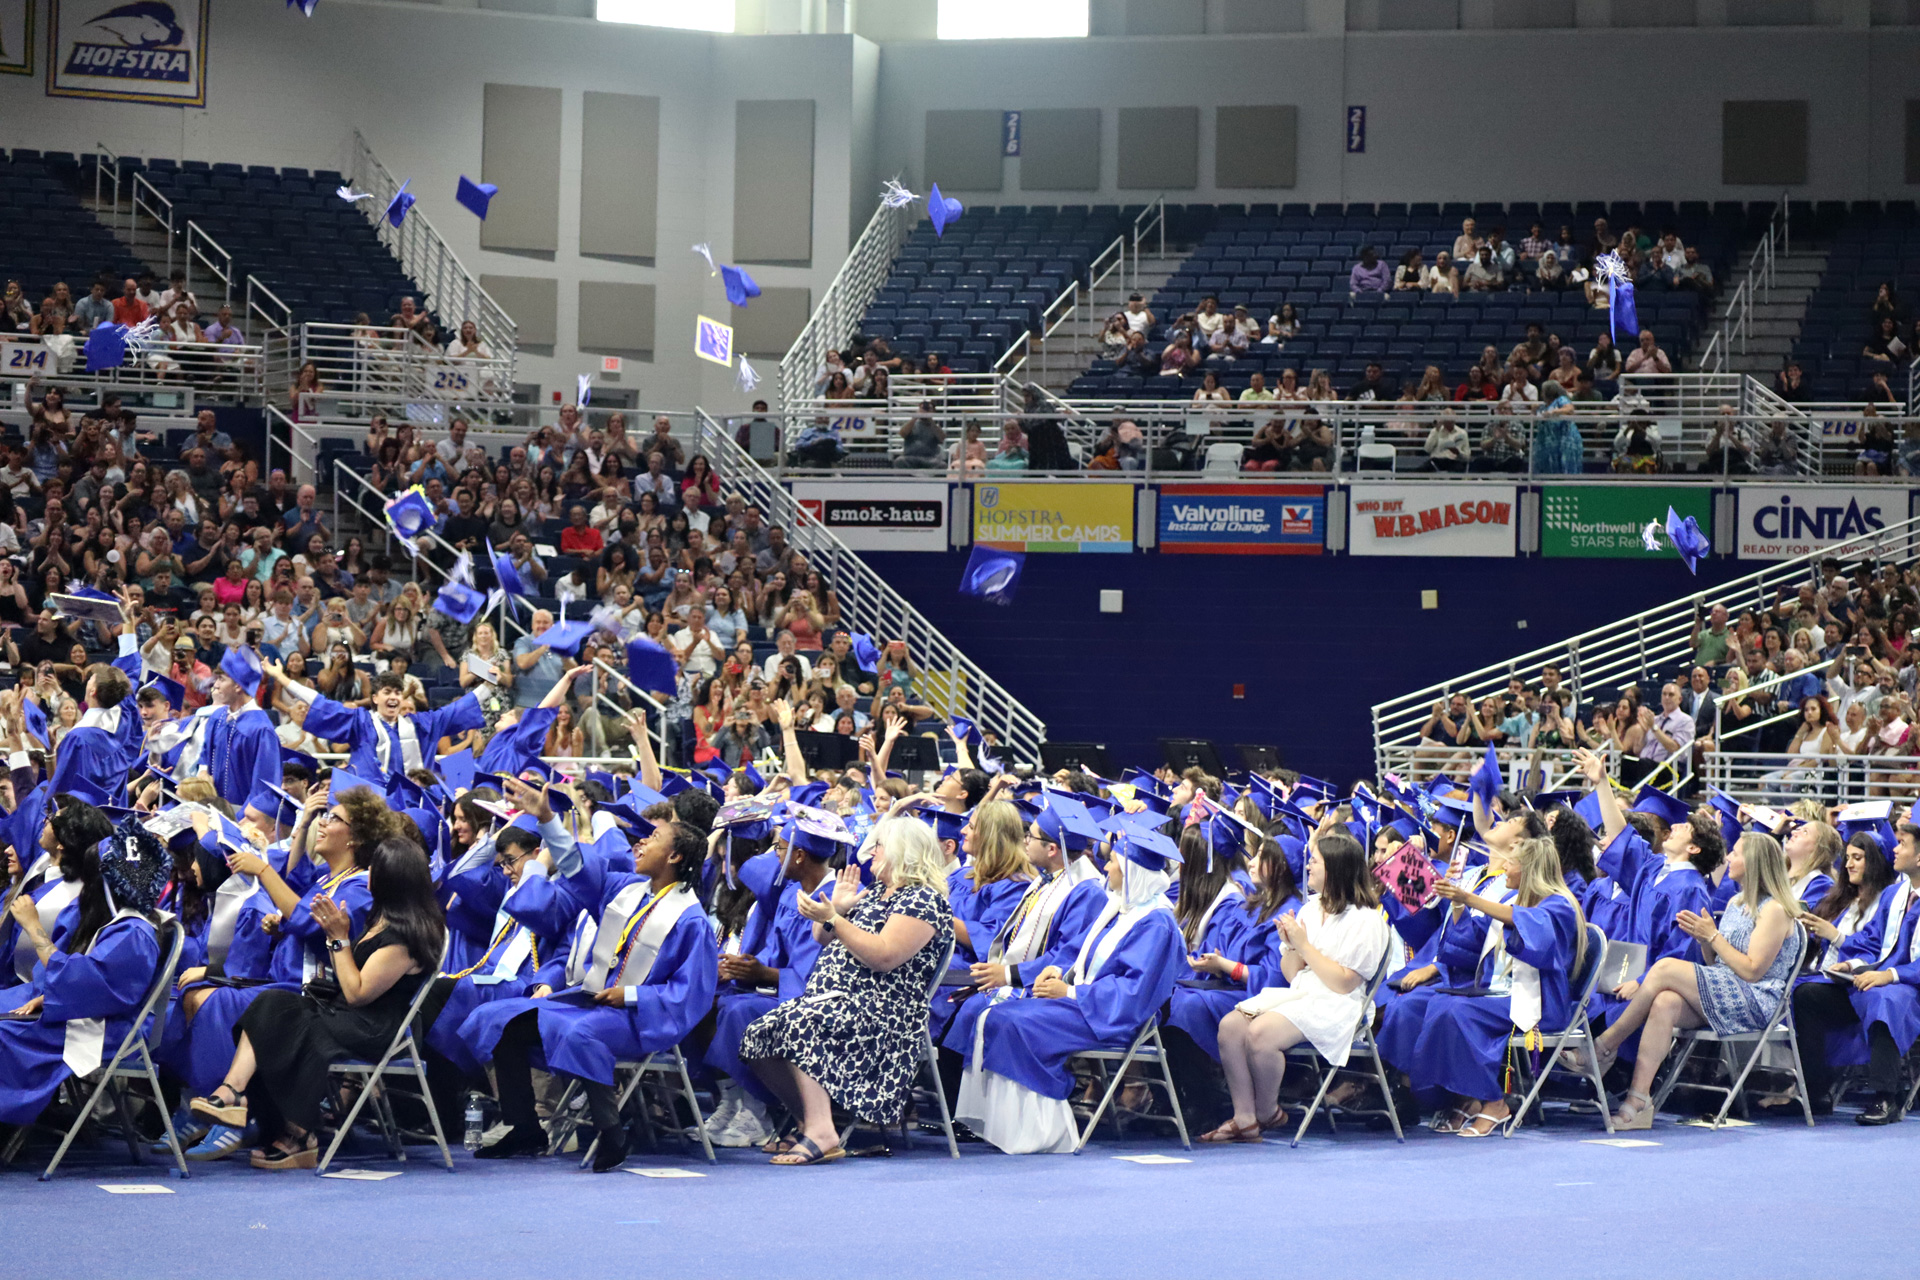 More than a decade of lessons, achievements and connections were represented in a single unforgettable moment as the Division Avenue High School Class of 2024 crossed the stage and became graduates at the Hofstra University David S. Mack Sports and Exhibition Complex on June 22.